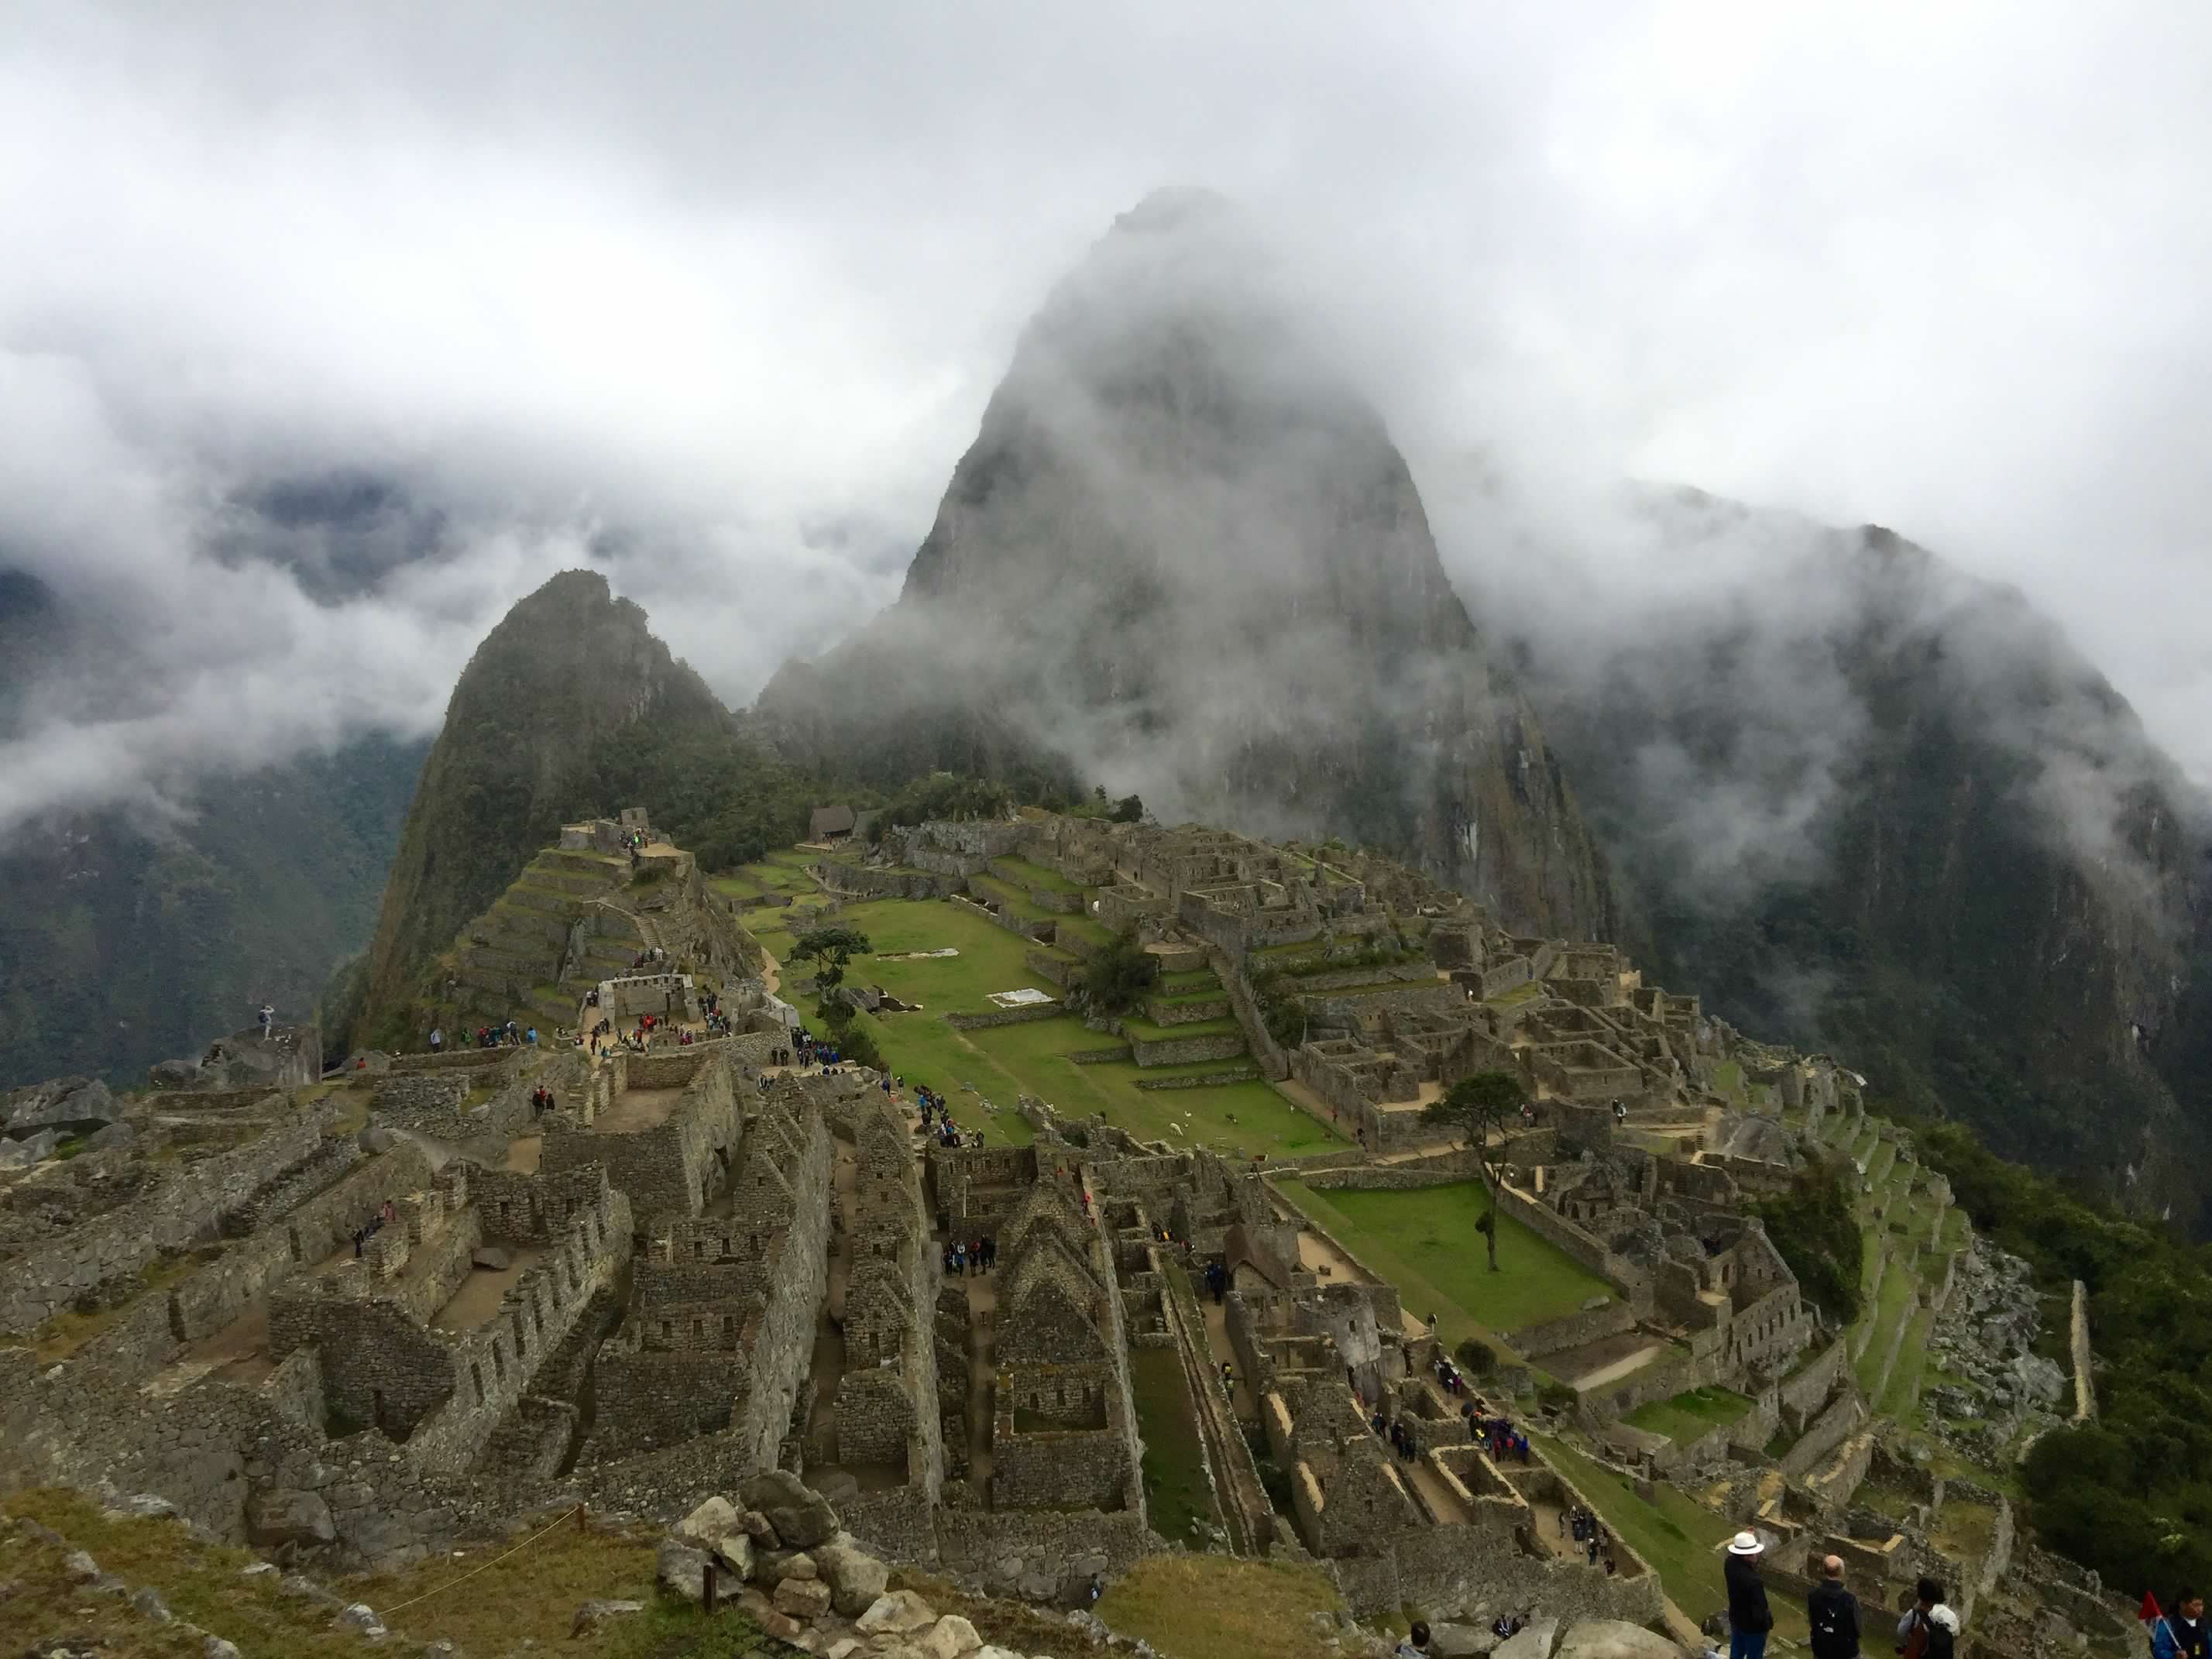 View of Machu Picchu from hike on the Inka trail